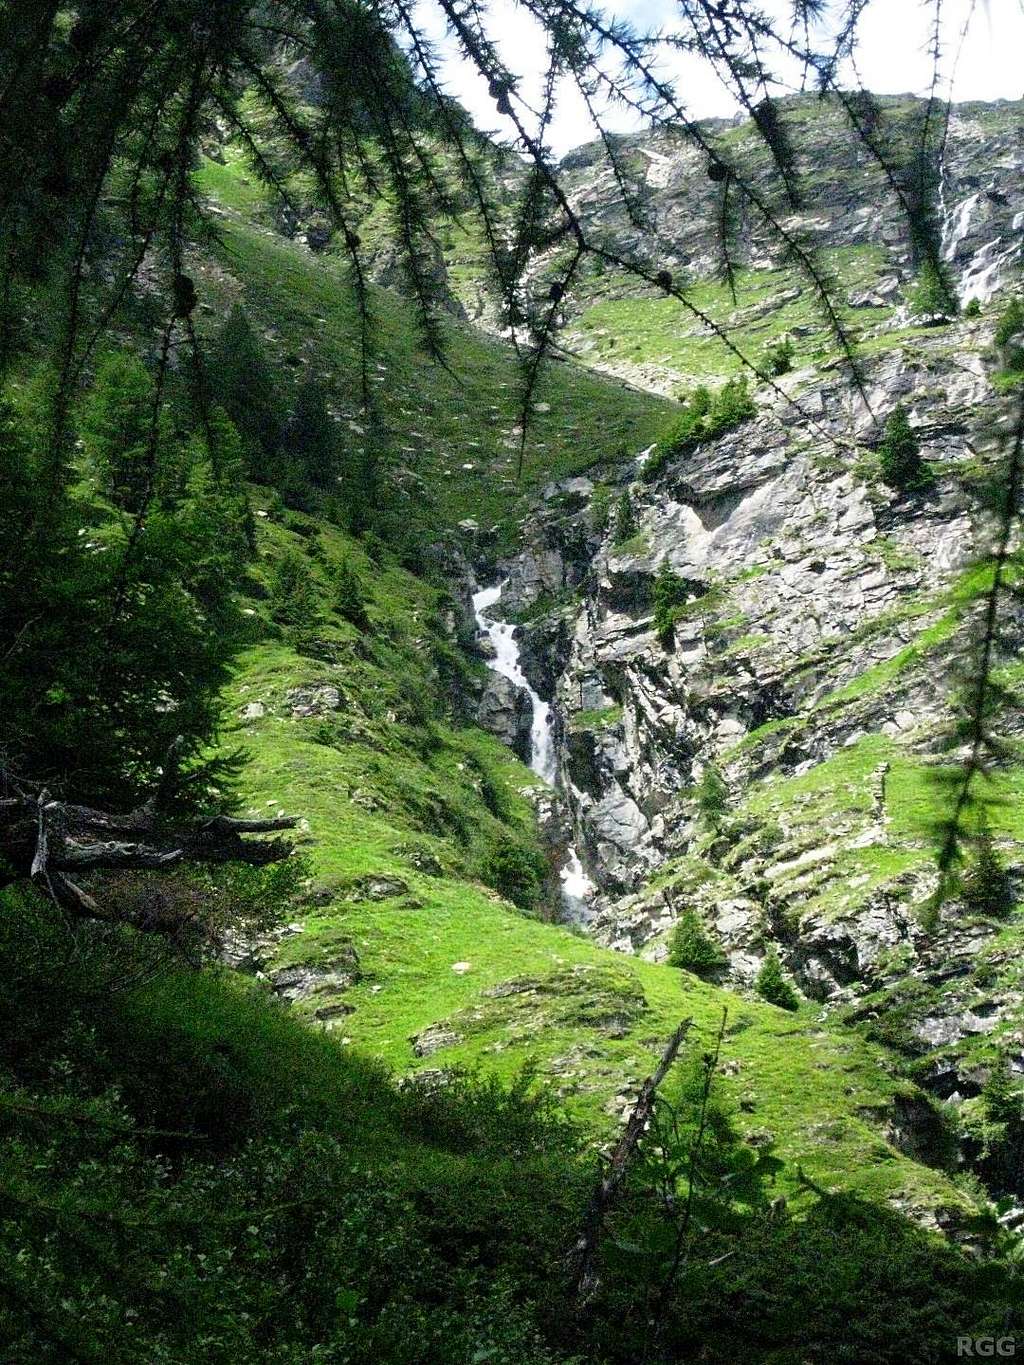 Along the trail from Schwiedernen to the Topalihütte